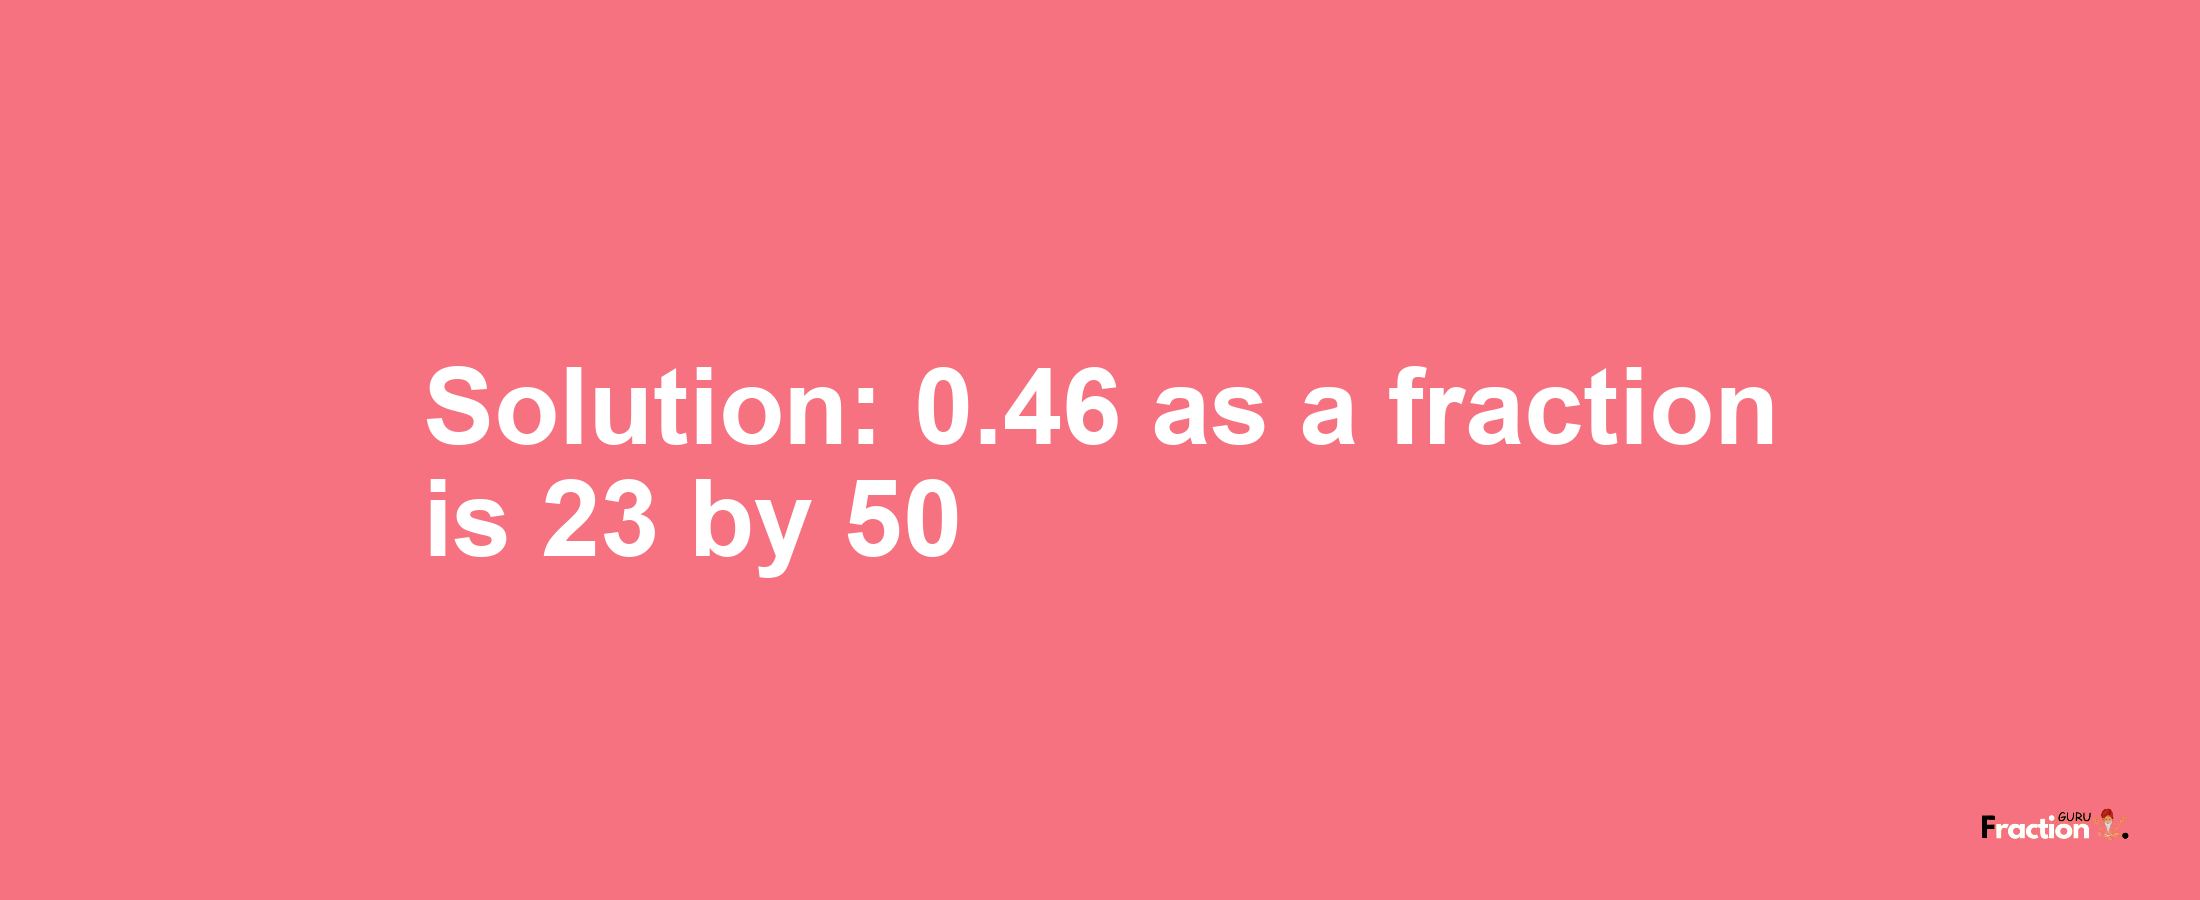 Solution:0.46 as a fraction is 23/50